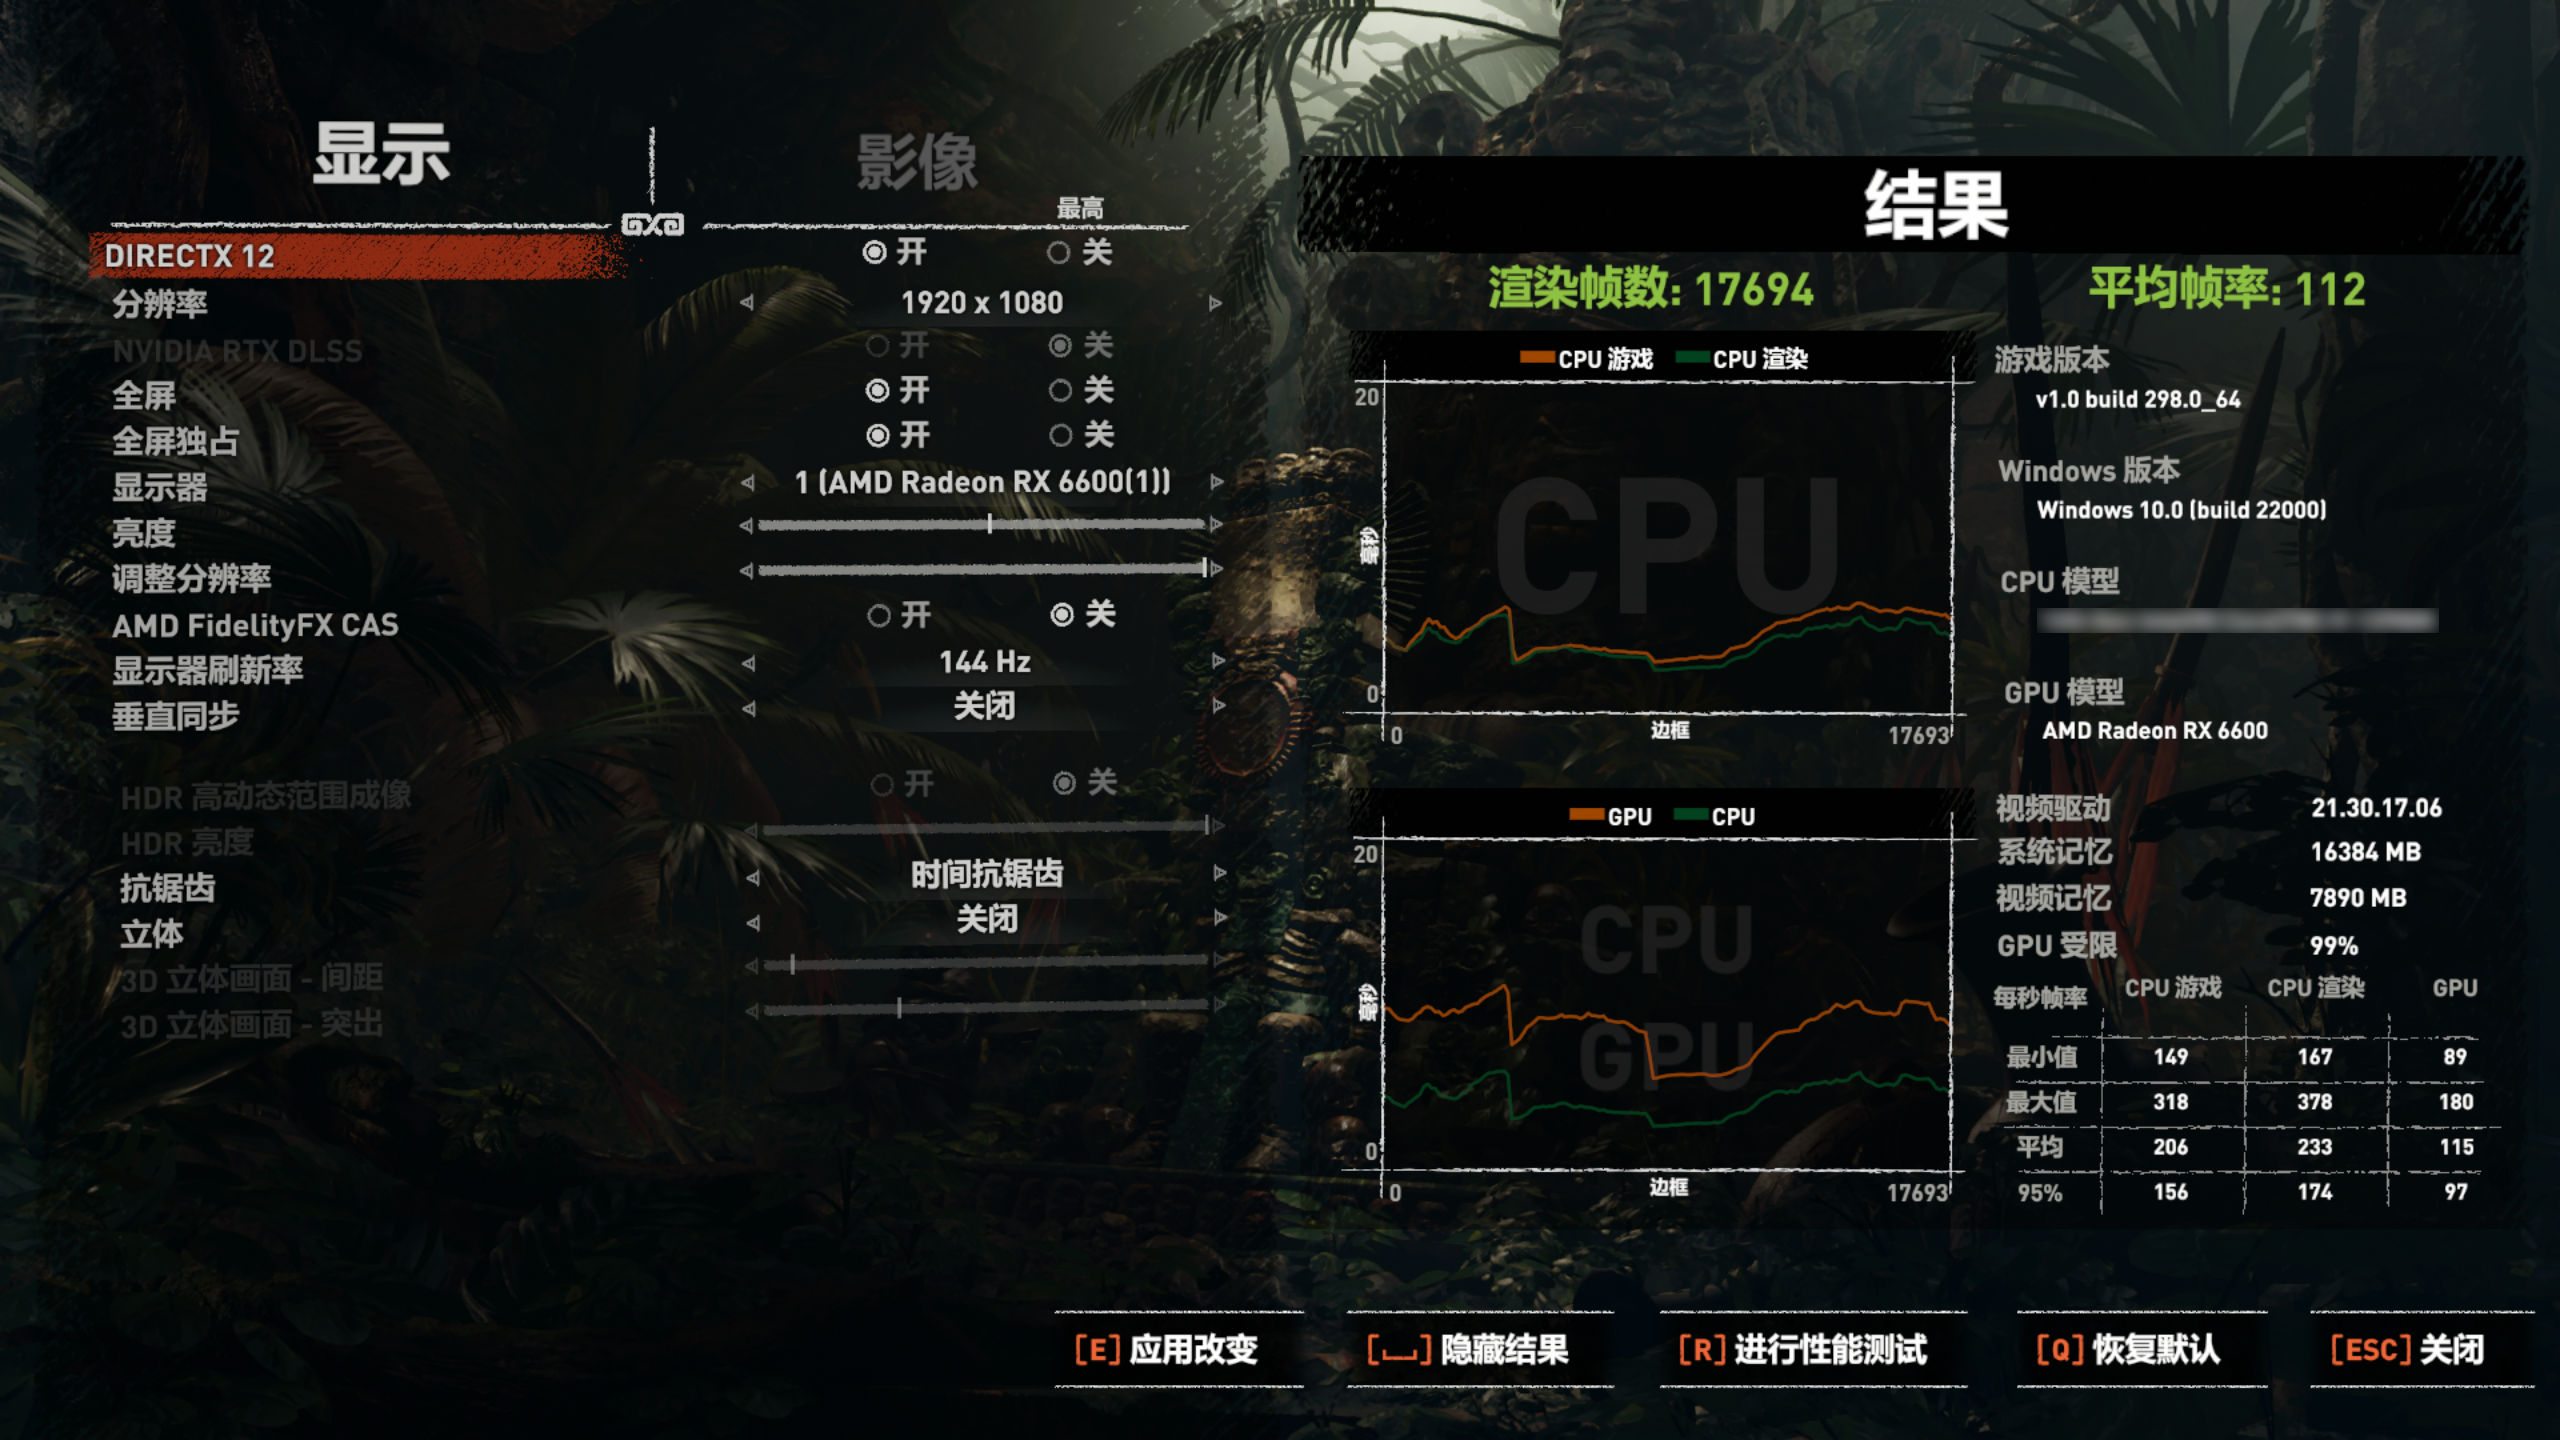 First test results for the AMD Ryzen 7 5800X3D are in: easily beats Intel's  i9-12900K/S in Shadow of the Tomb Raider, but proves quite underwhelming in  synthetic benchmarks -  News